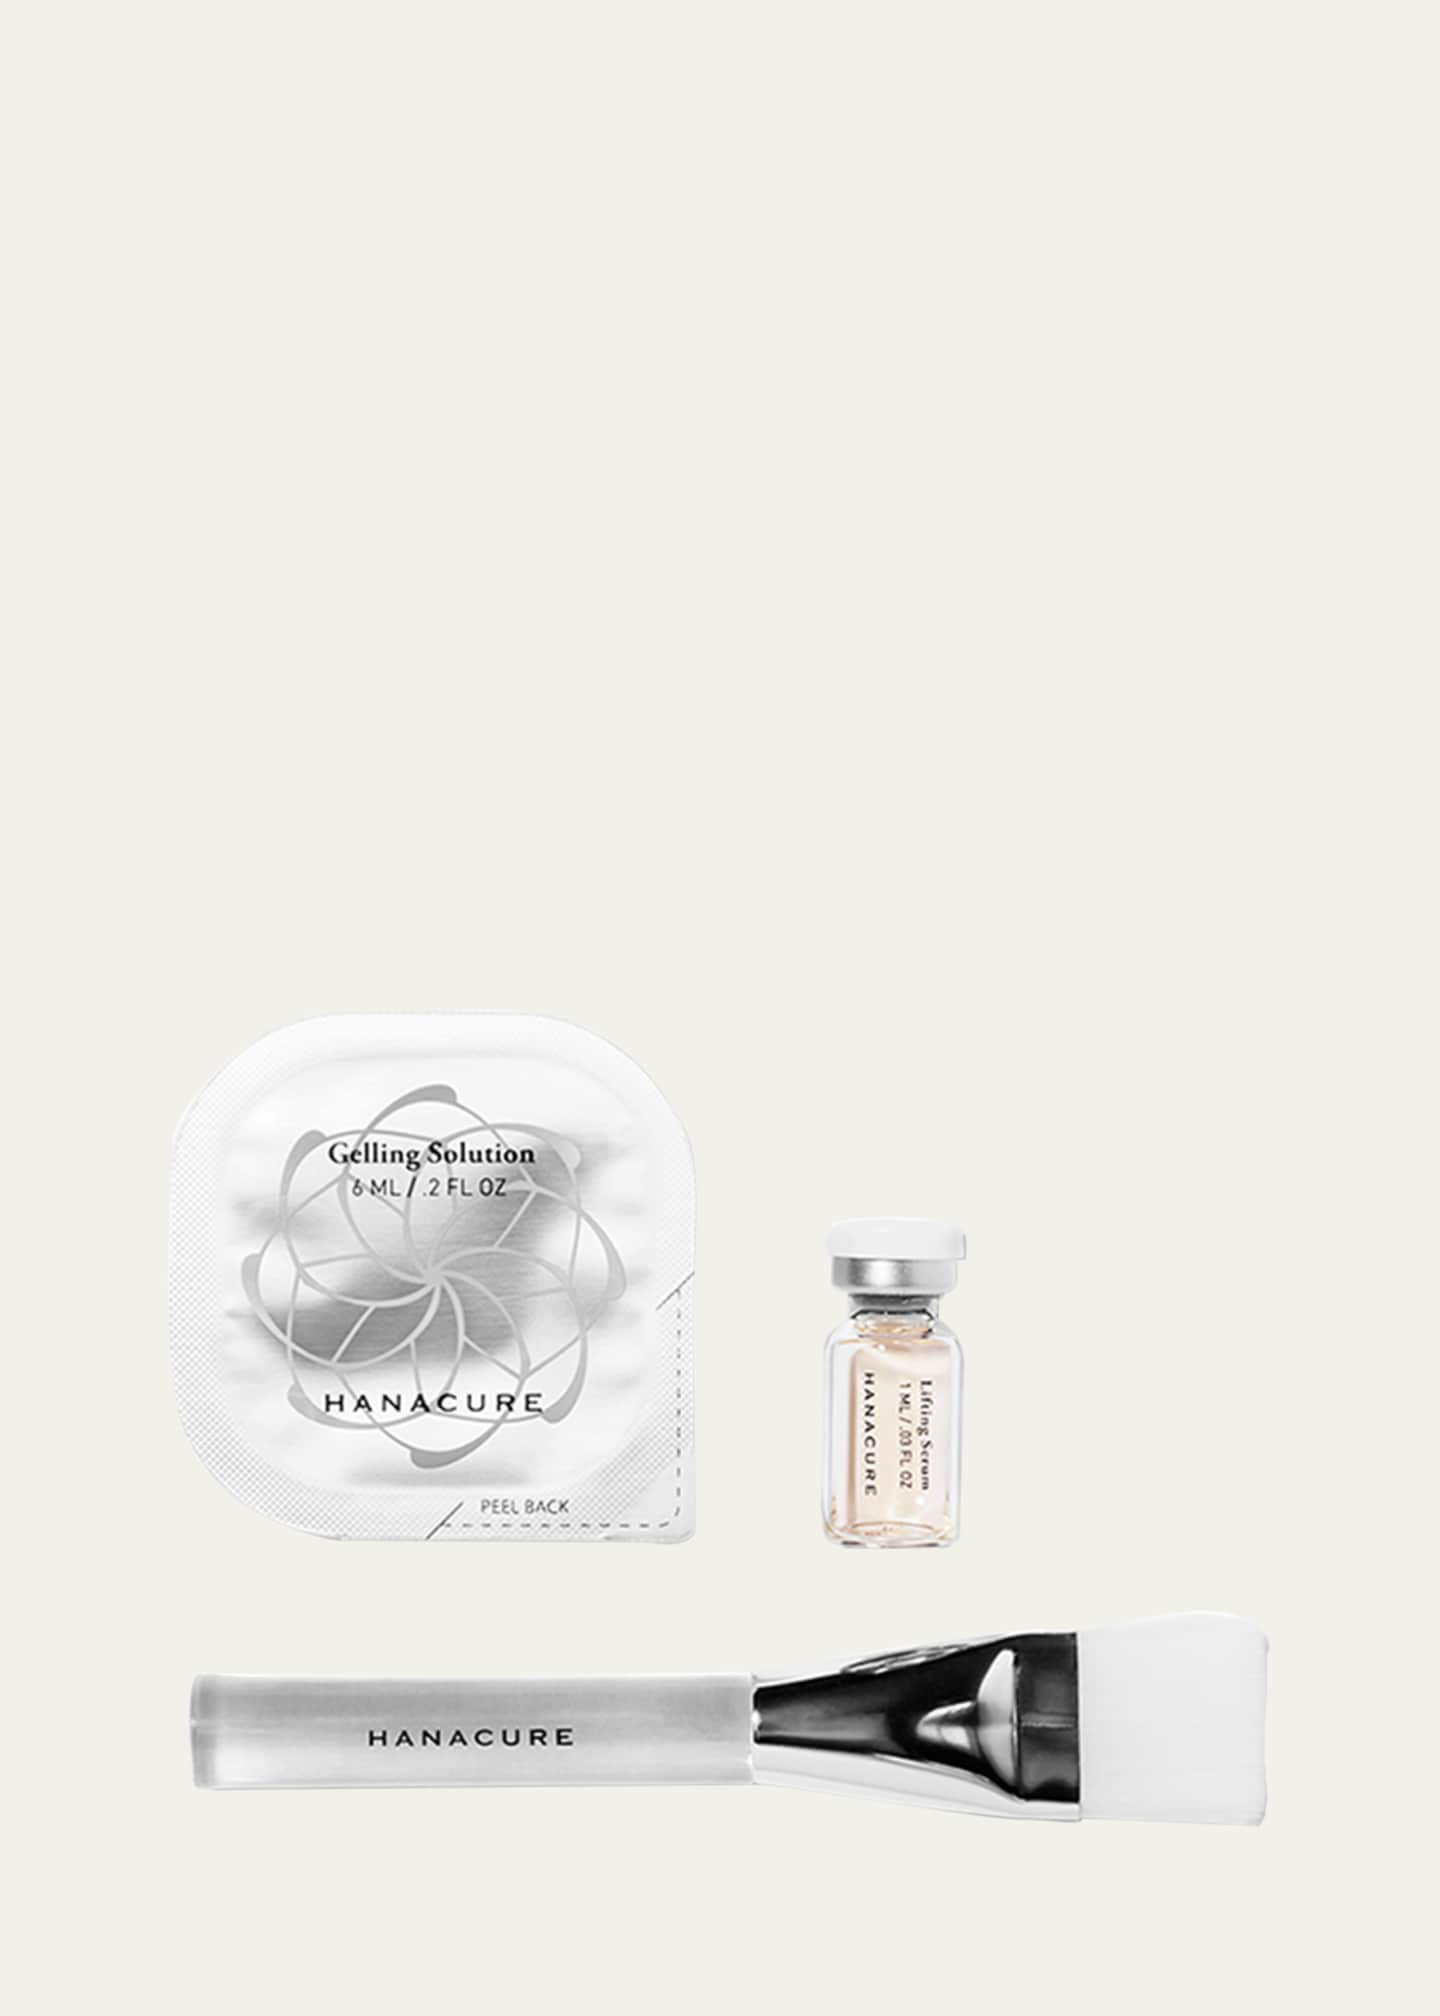 Hanacure All-in-one Facial Starter Set Image 1 of 5